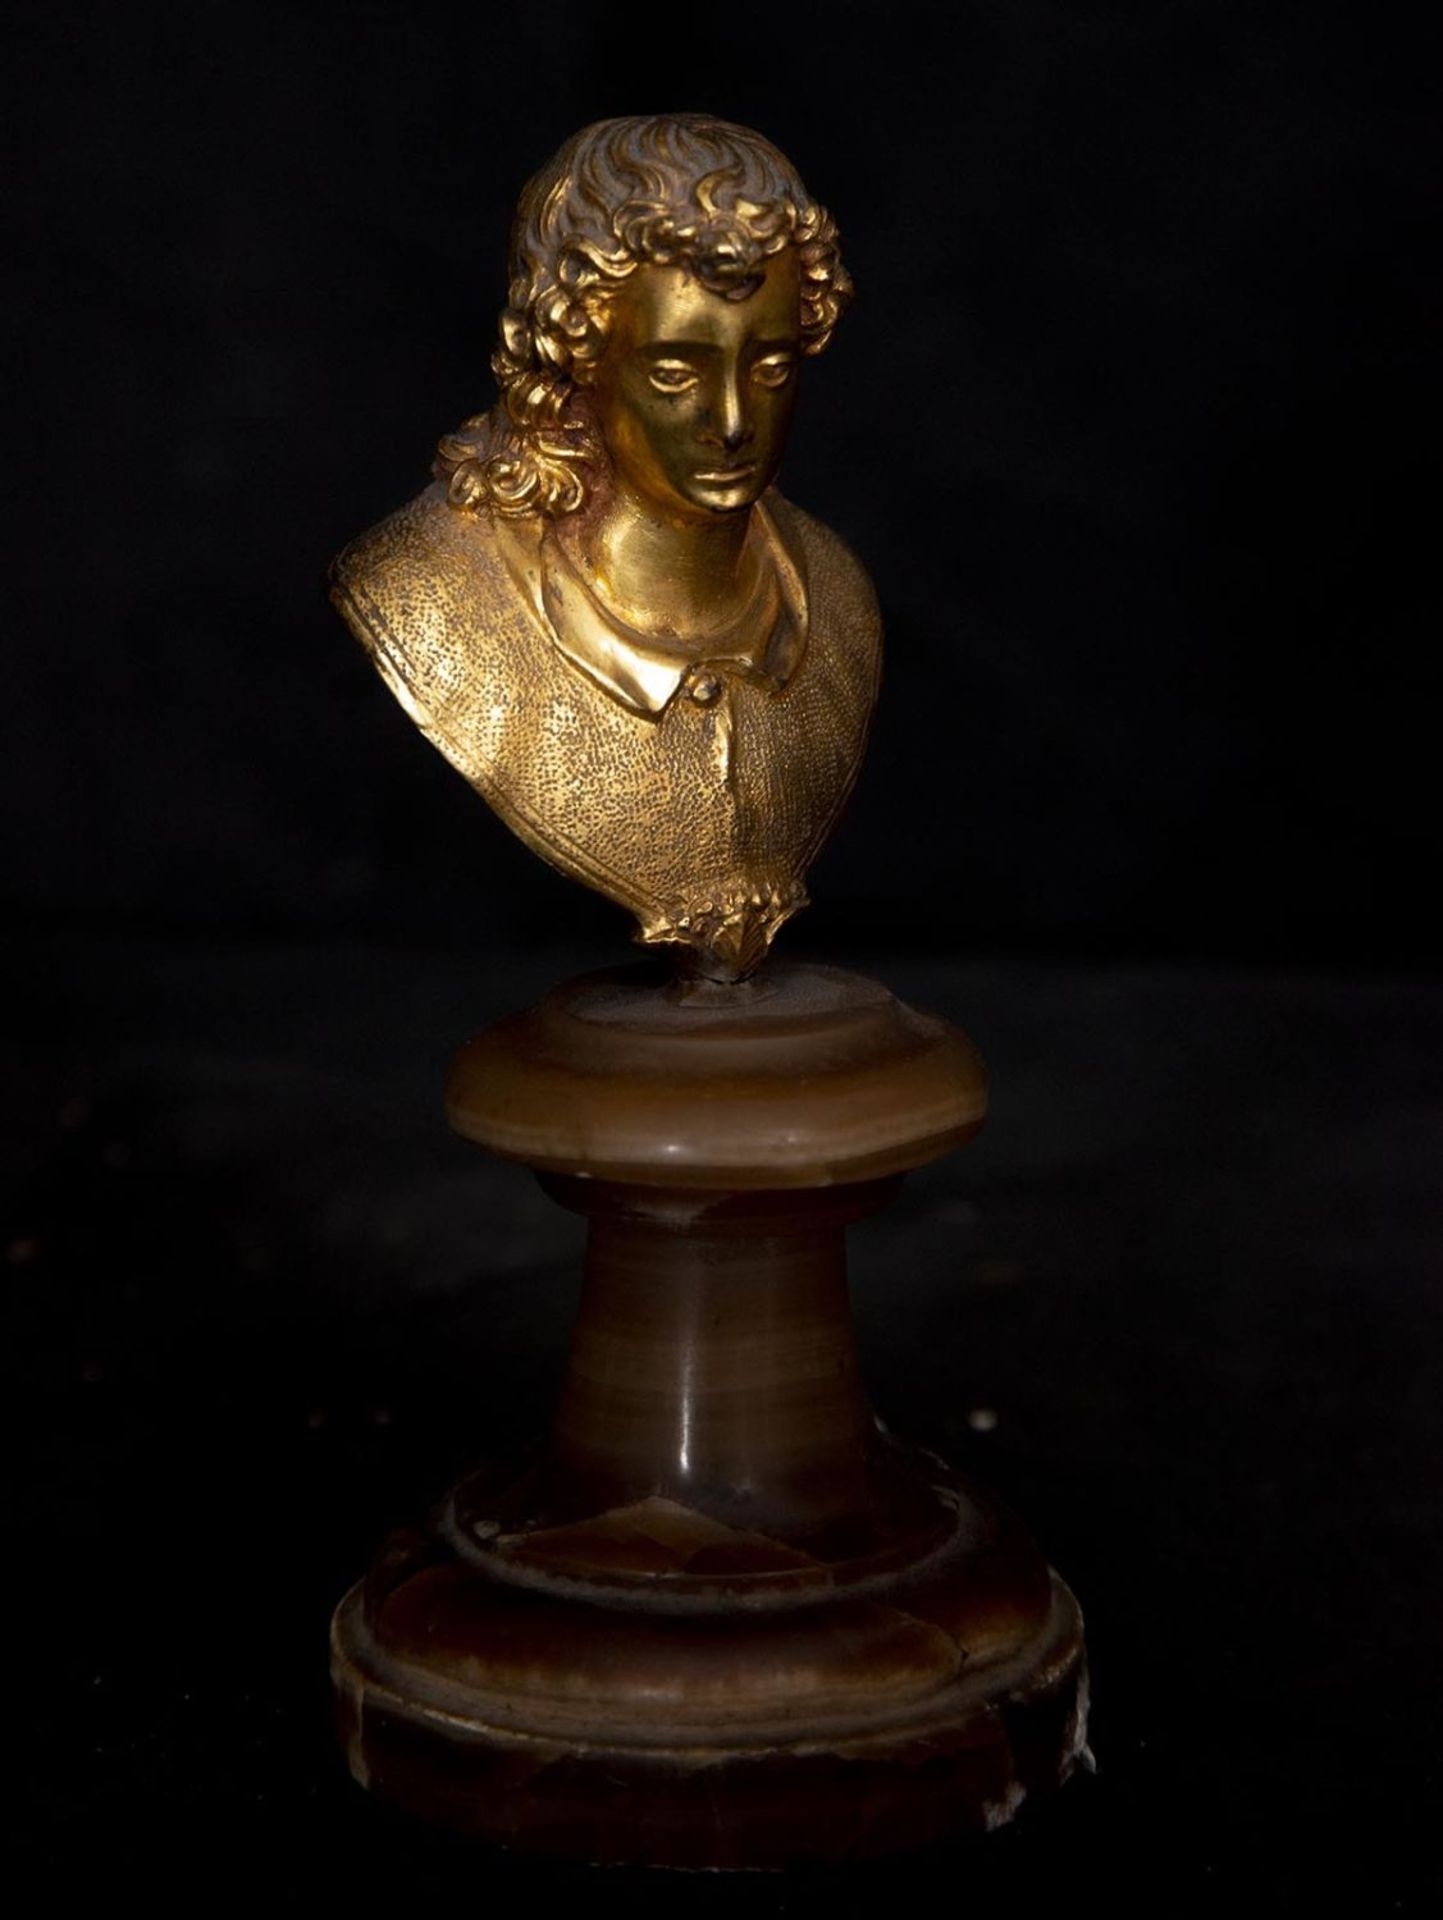 Exquisite bust in gilt bronze with onyx base, Italian school of Alessandro Algardi, Italy, 17th cent - Image 4 of 5